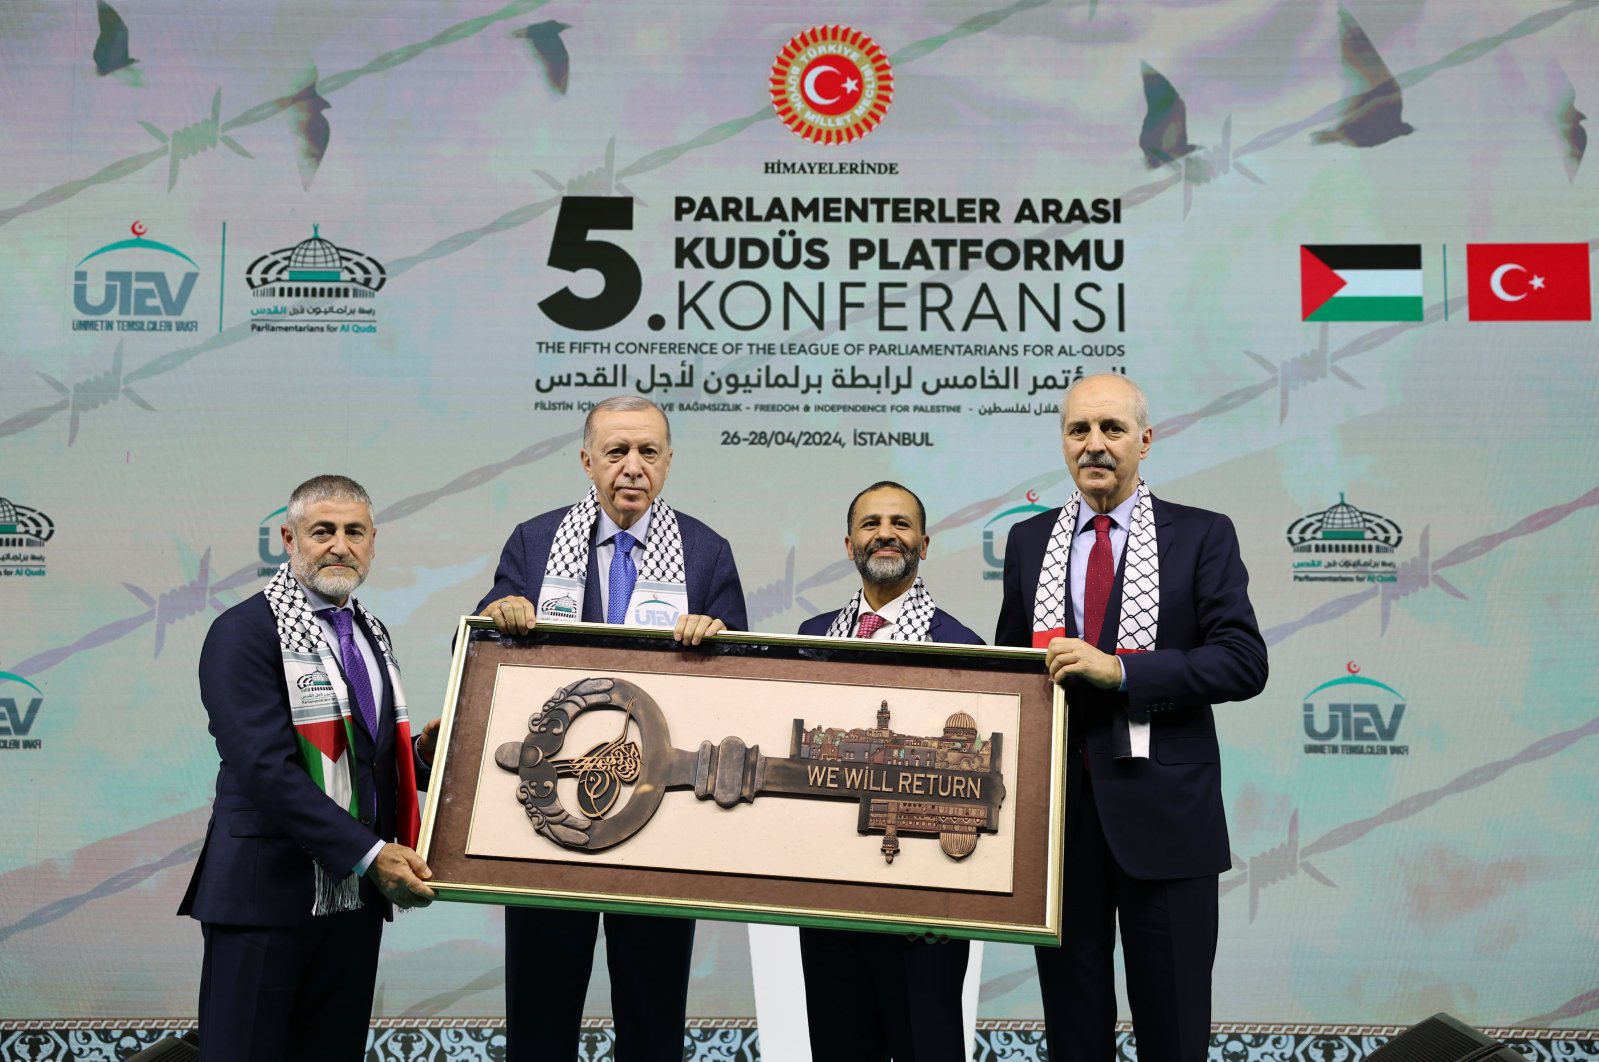 President Recep Tayyip Erdoğan is seen at the fifth conference of the League of Parliamentarians for Al-Quds and Palestine, Istanbul, Türkiye, April 26, 2024 (AA Photo)